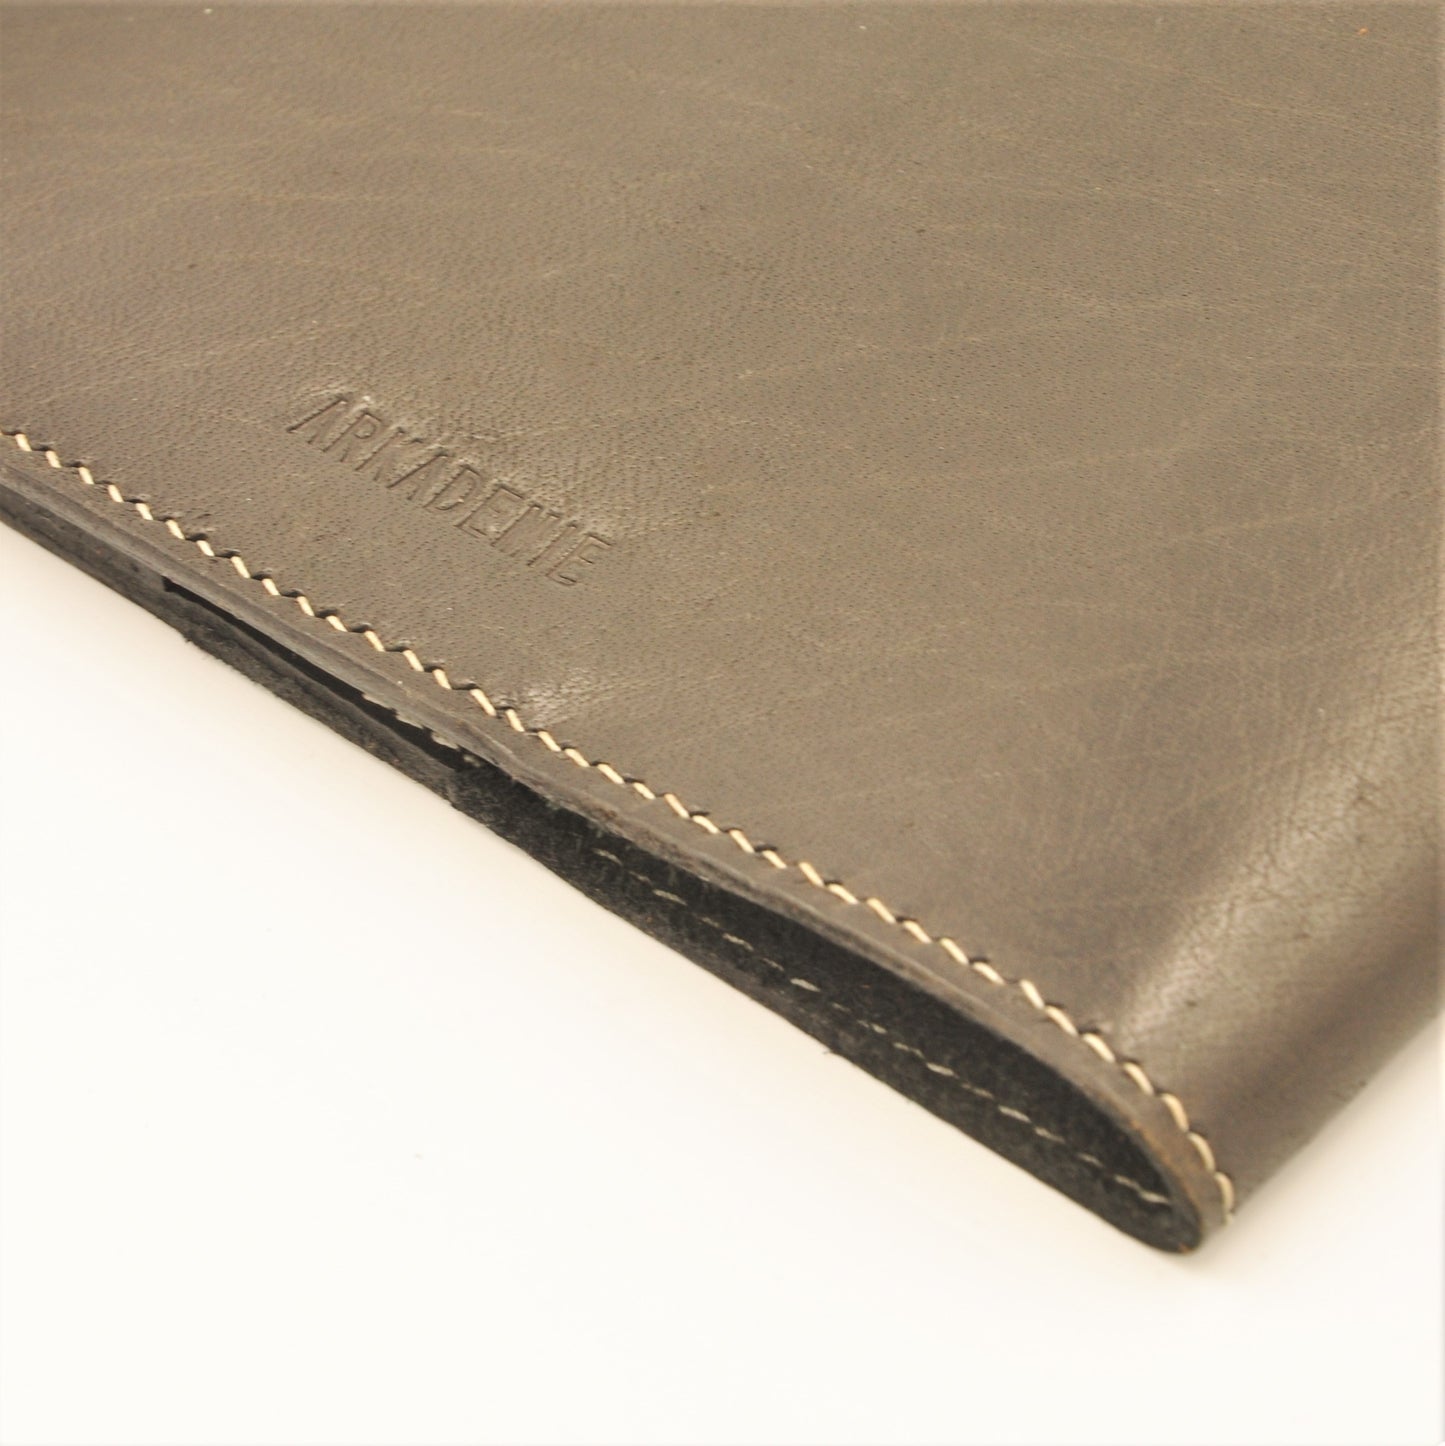 ROHE A5-P Leather Notebook Sleeve